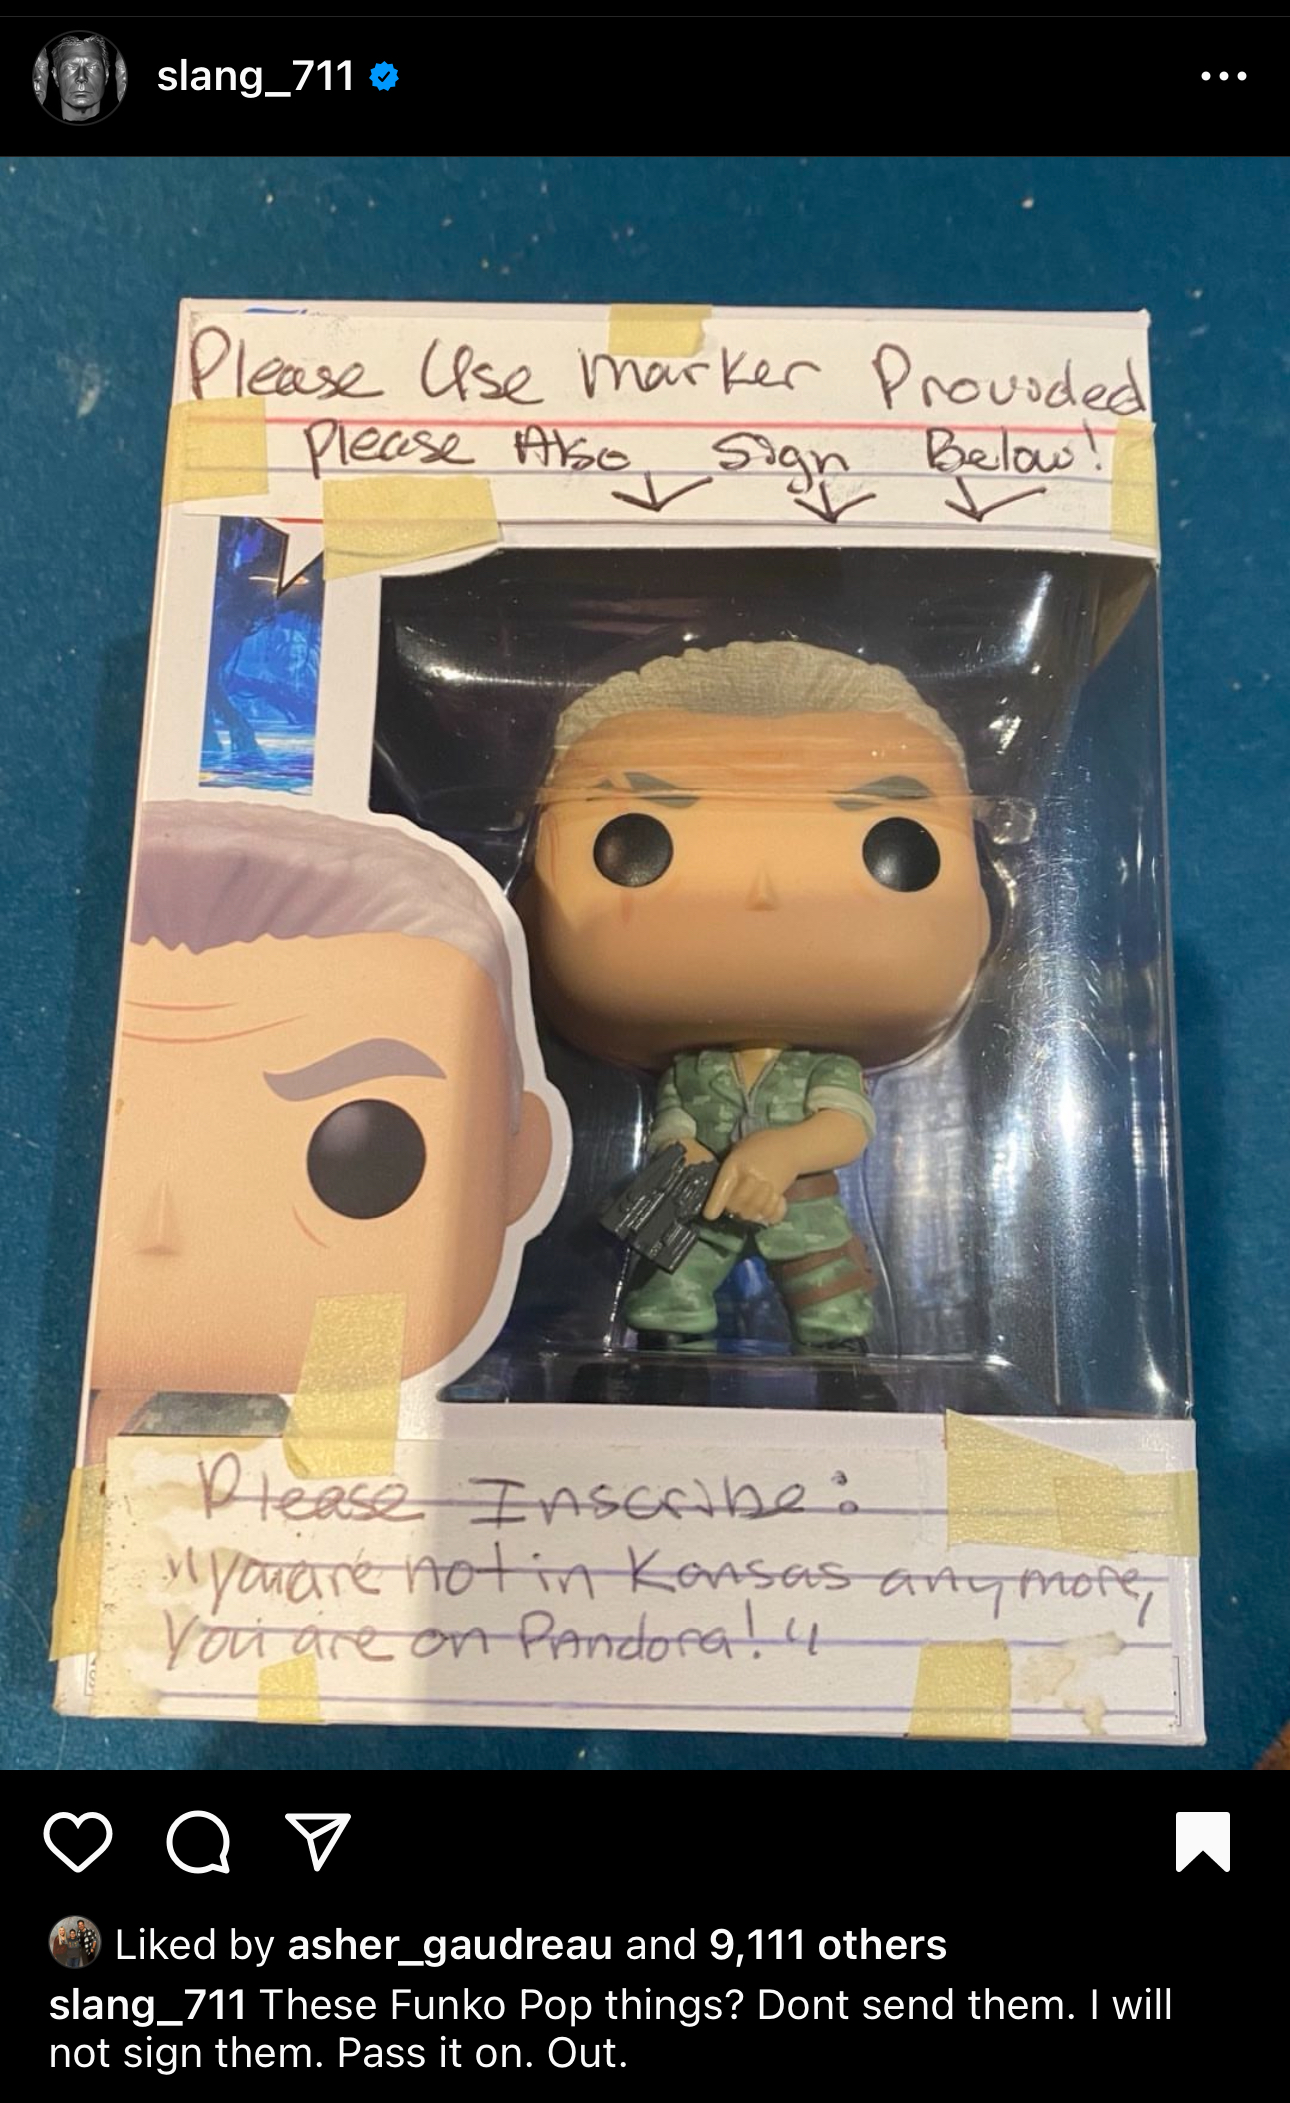 slang_711 These Funko Pop things? Dont send them. I will not sign them. Pass it on. Out.